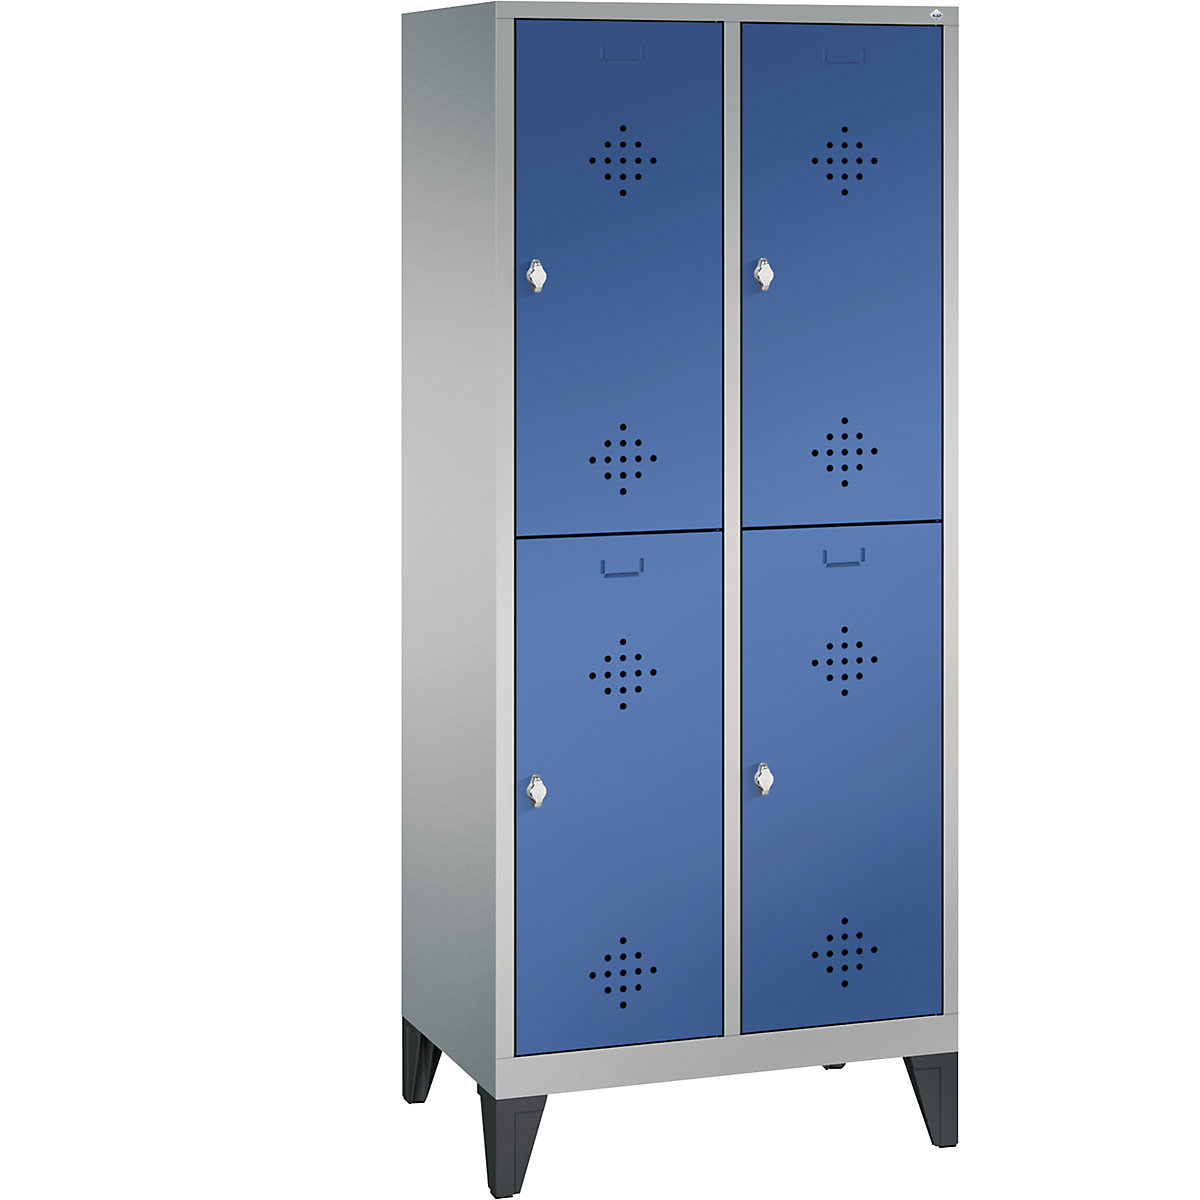 CLASSIC cloakroom locker with feet, double tier – C+P, 2 compartments, 2 shelf compartments each, compartment width 400 mm, white aluminium / gentian blue-3